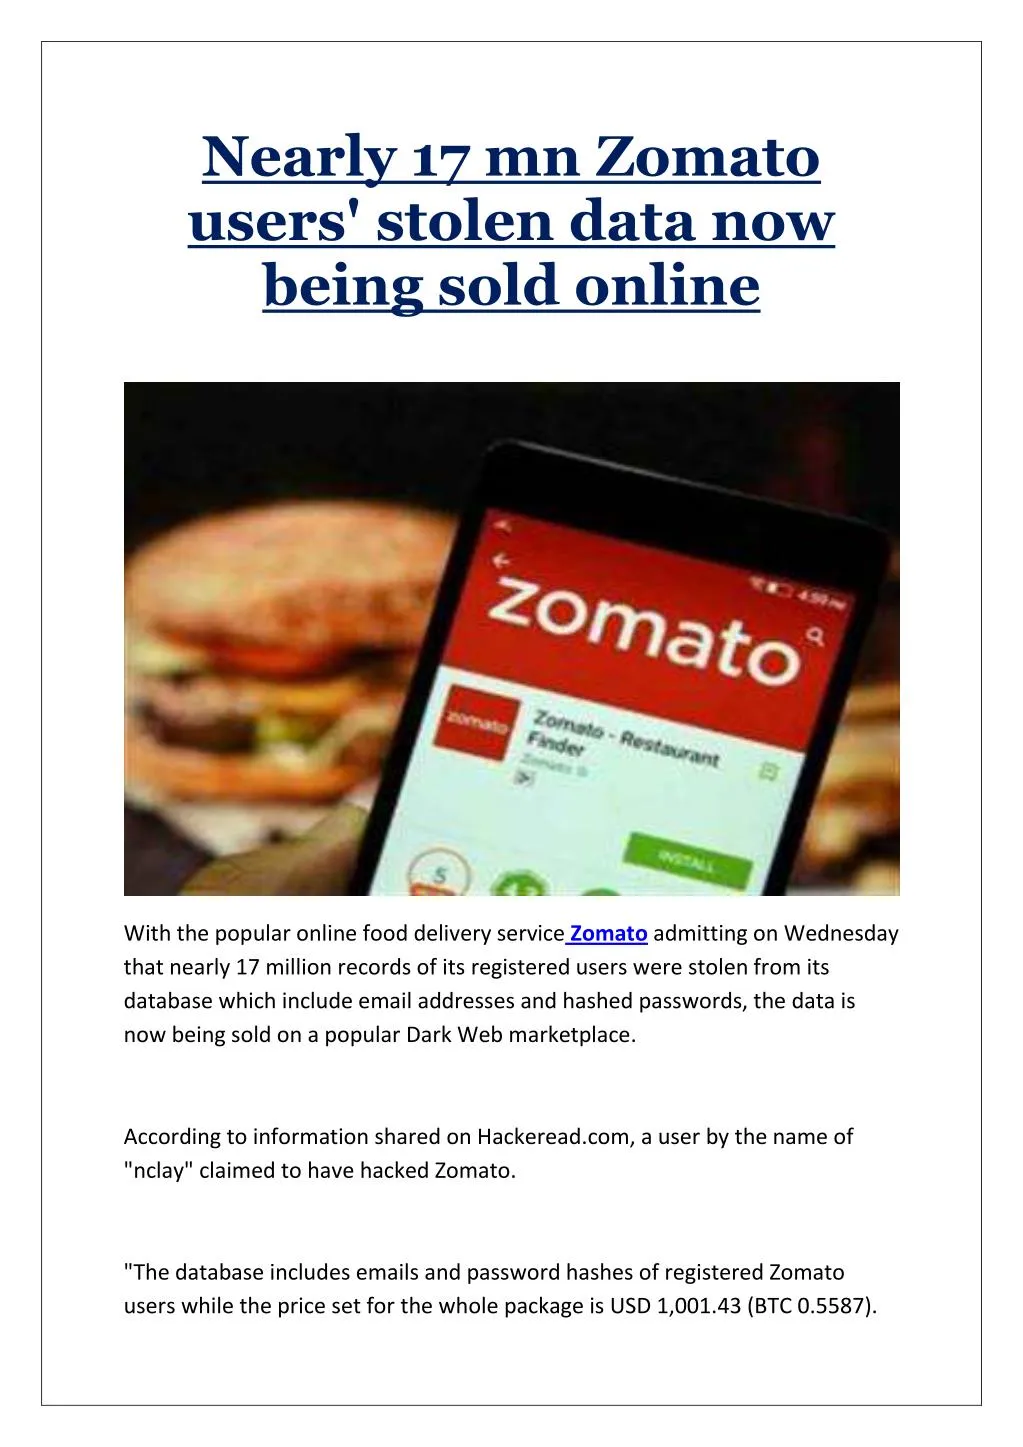 nearly 17 mn zomato users stolen data now being